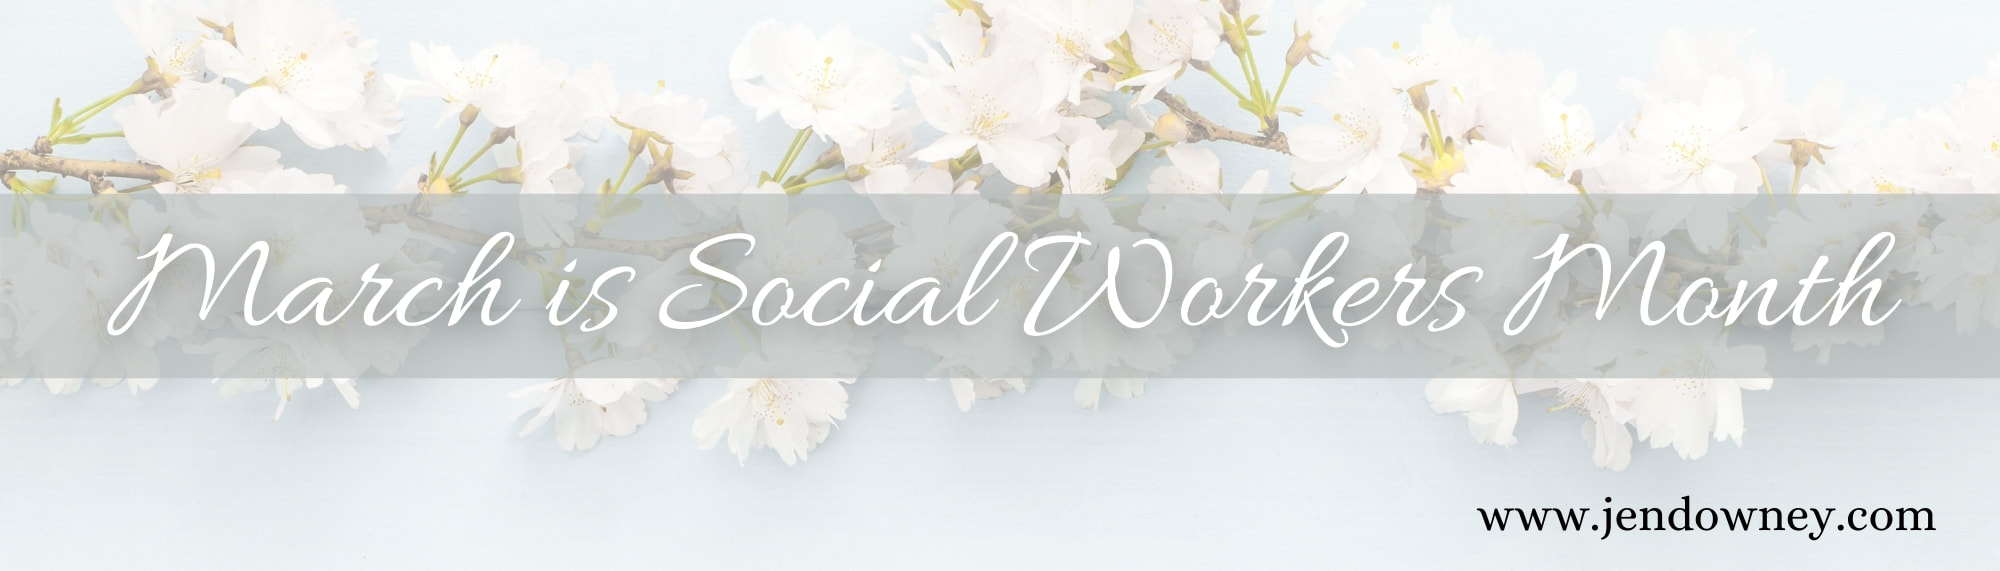 March is social workers month